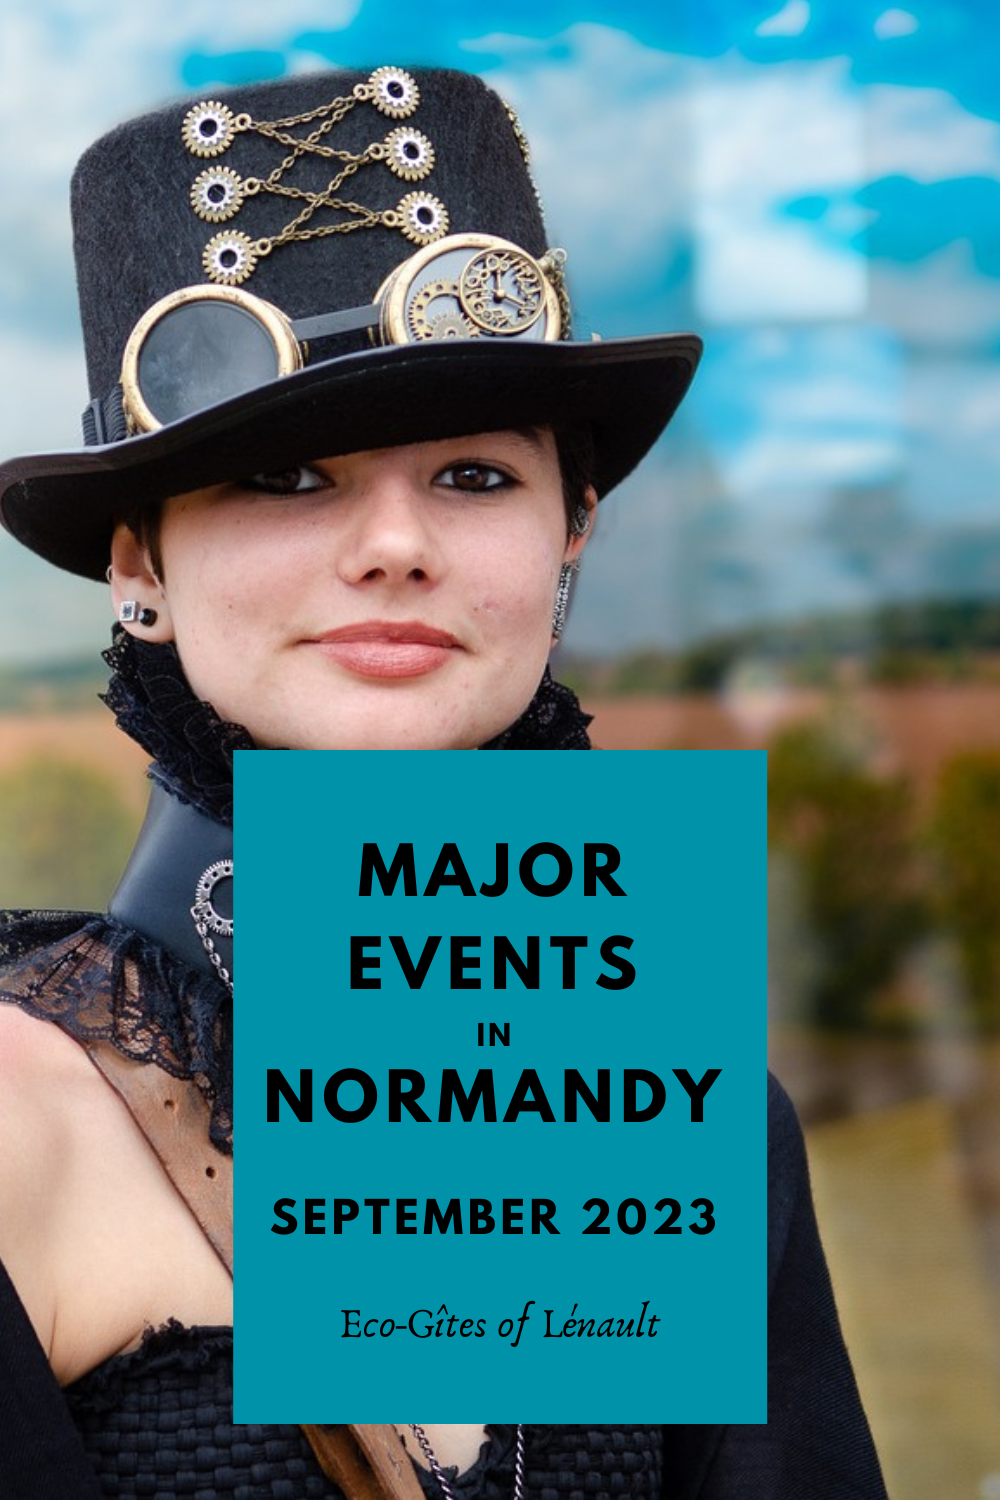 Major events in Normandy in Spetember 2023